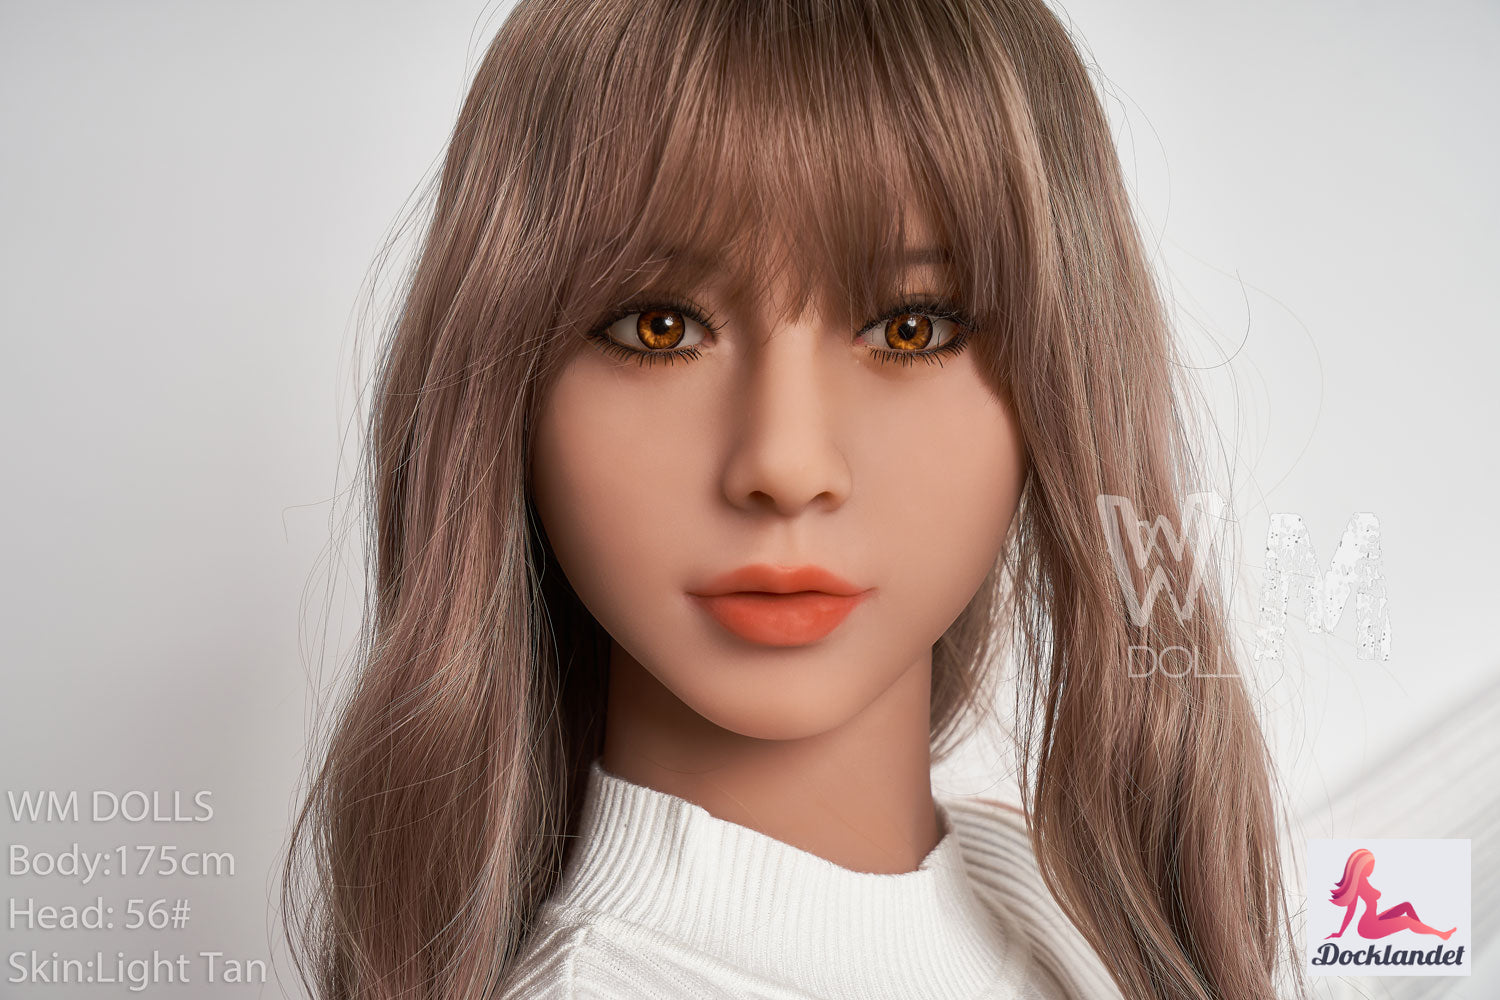 WM-Doll 175 cm G-Cup TPE. TPE and Silicone Doll From WM-Doll. Also Referred to As Liquid Silicone Rubber (LSR), Silicone is a class of polymers Made Up of Repeating Units of Siloxane. IT'S RUBBERY AND SOFT TO TOUCH, WHICE HAS MADE SILICONE A MANUFACTUREERS 'FAVORITE FOR MANY YEARS. Moreover, Silicone is heat resistant which opens your world to new possibilities. For instance, unlike tpe sex dolls, you can sterlize silicone by boiling, making silicone sex dolls Easier to clean and mainain. Sex Dolls Made of Silicone Are More Durable, Easier to Clean and the Dolls Can Be Made to Look Extremely Realistic.